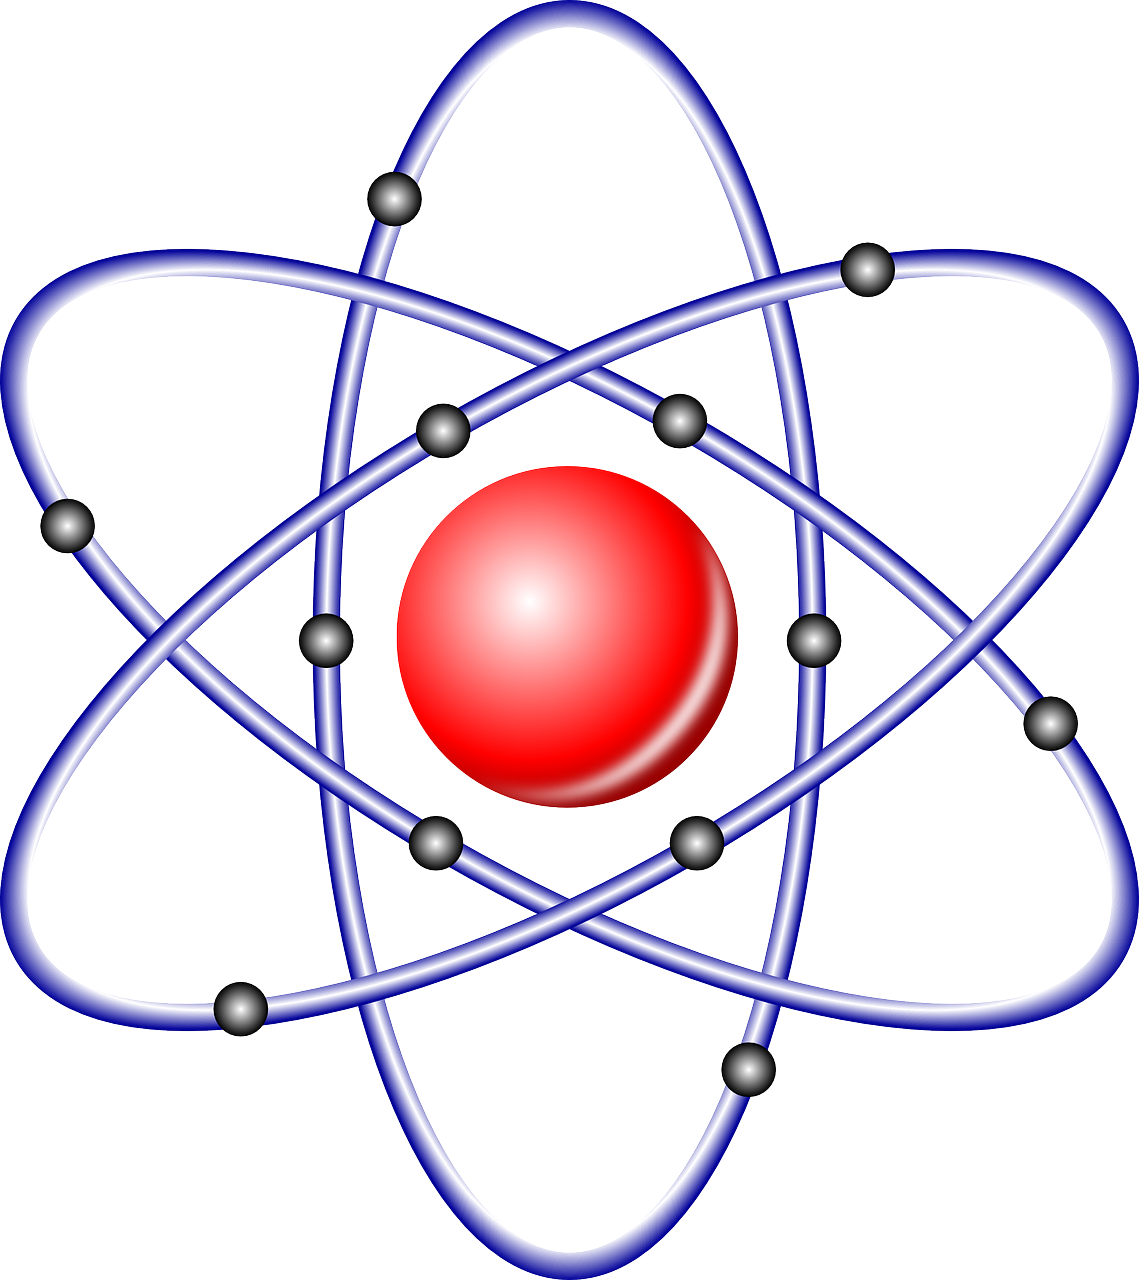 Clipart science atom. Connect to divinity metaphor